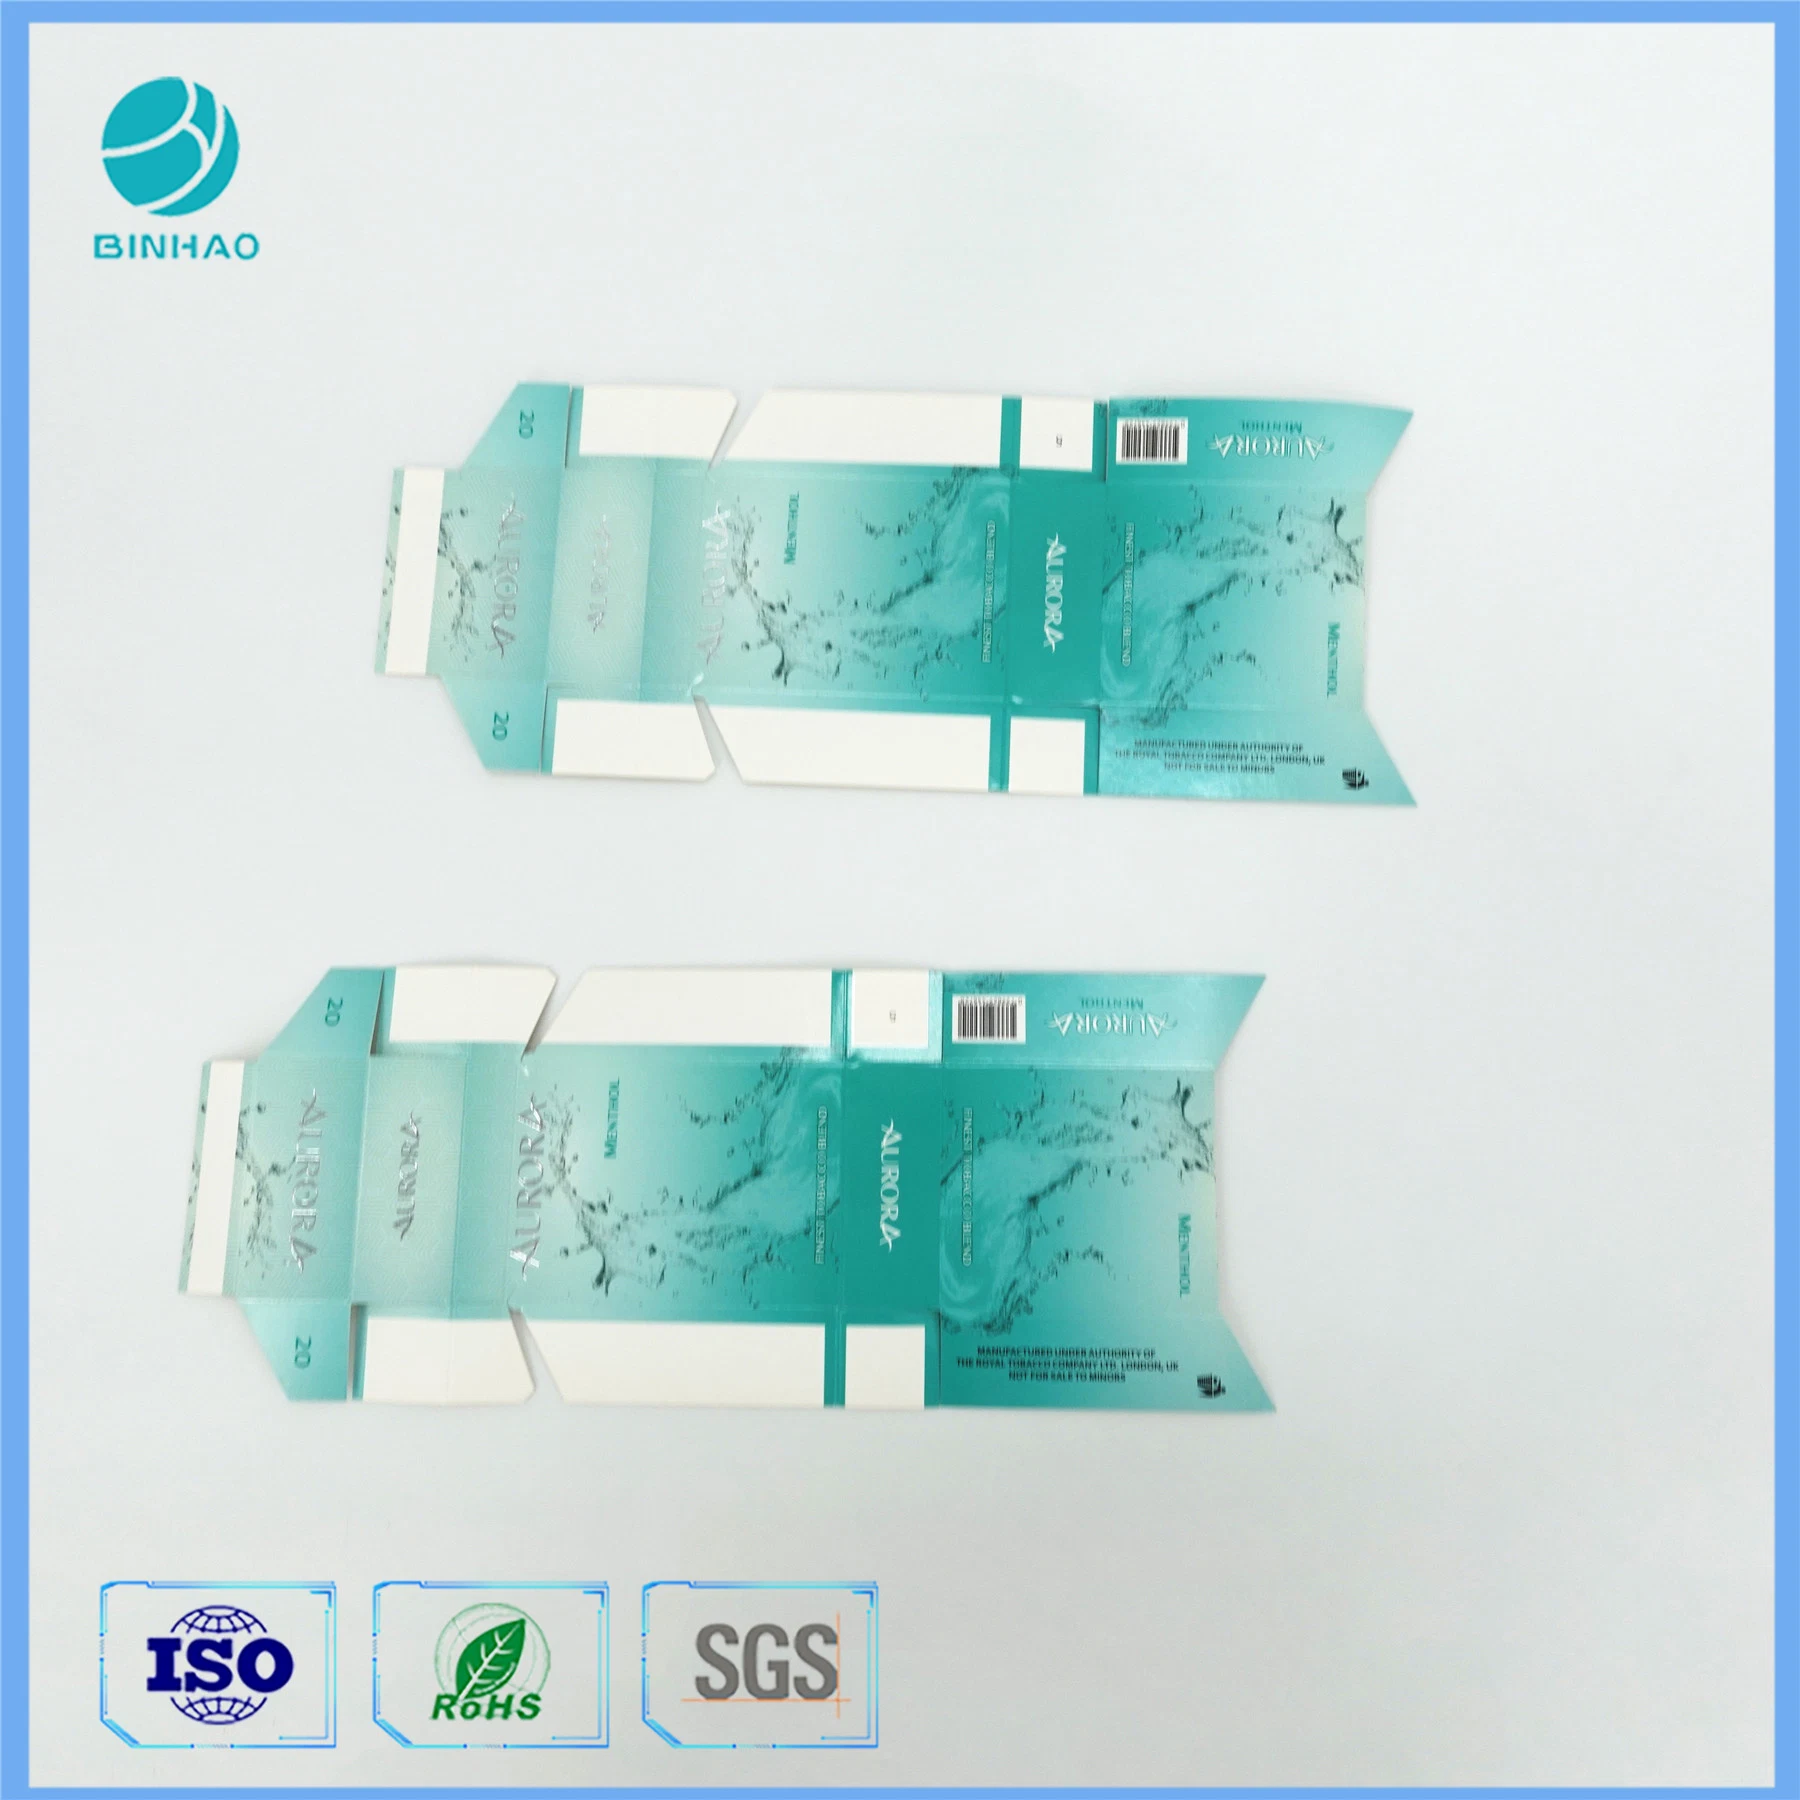 Tobacco Package Cases Printing Sbs/Fbb